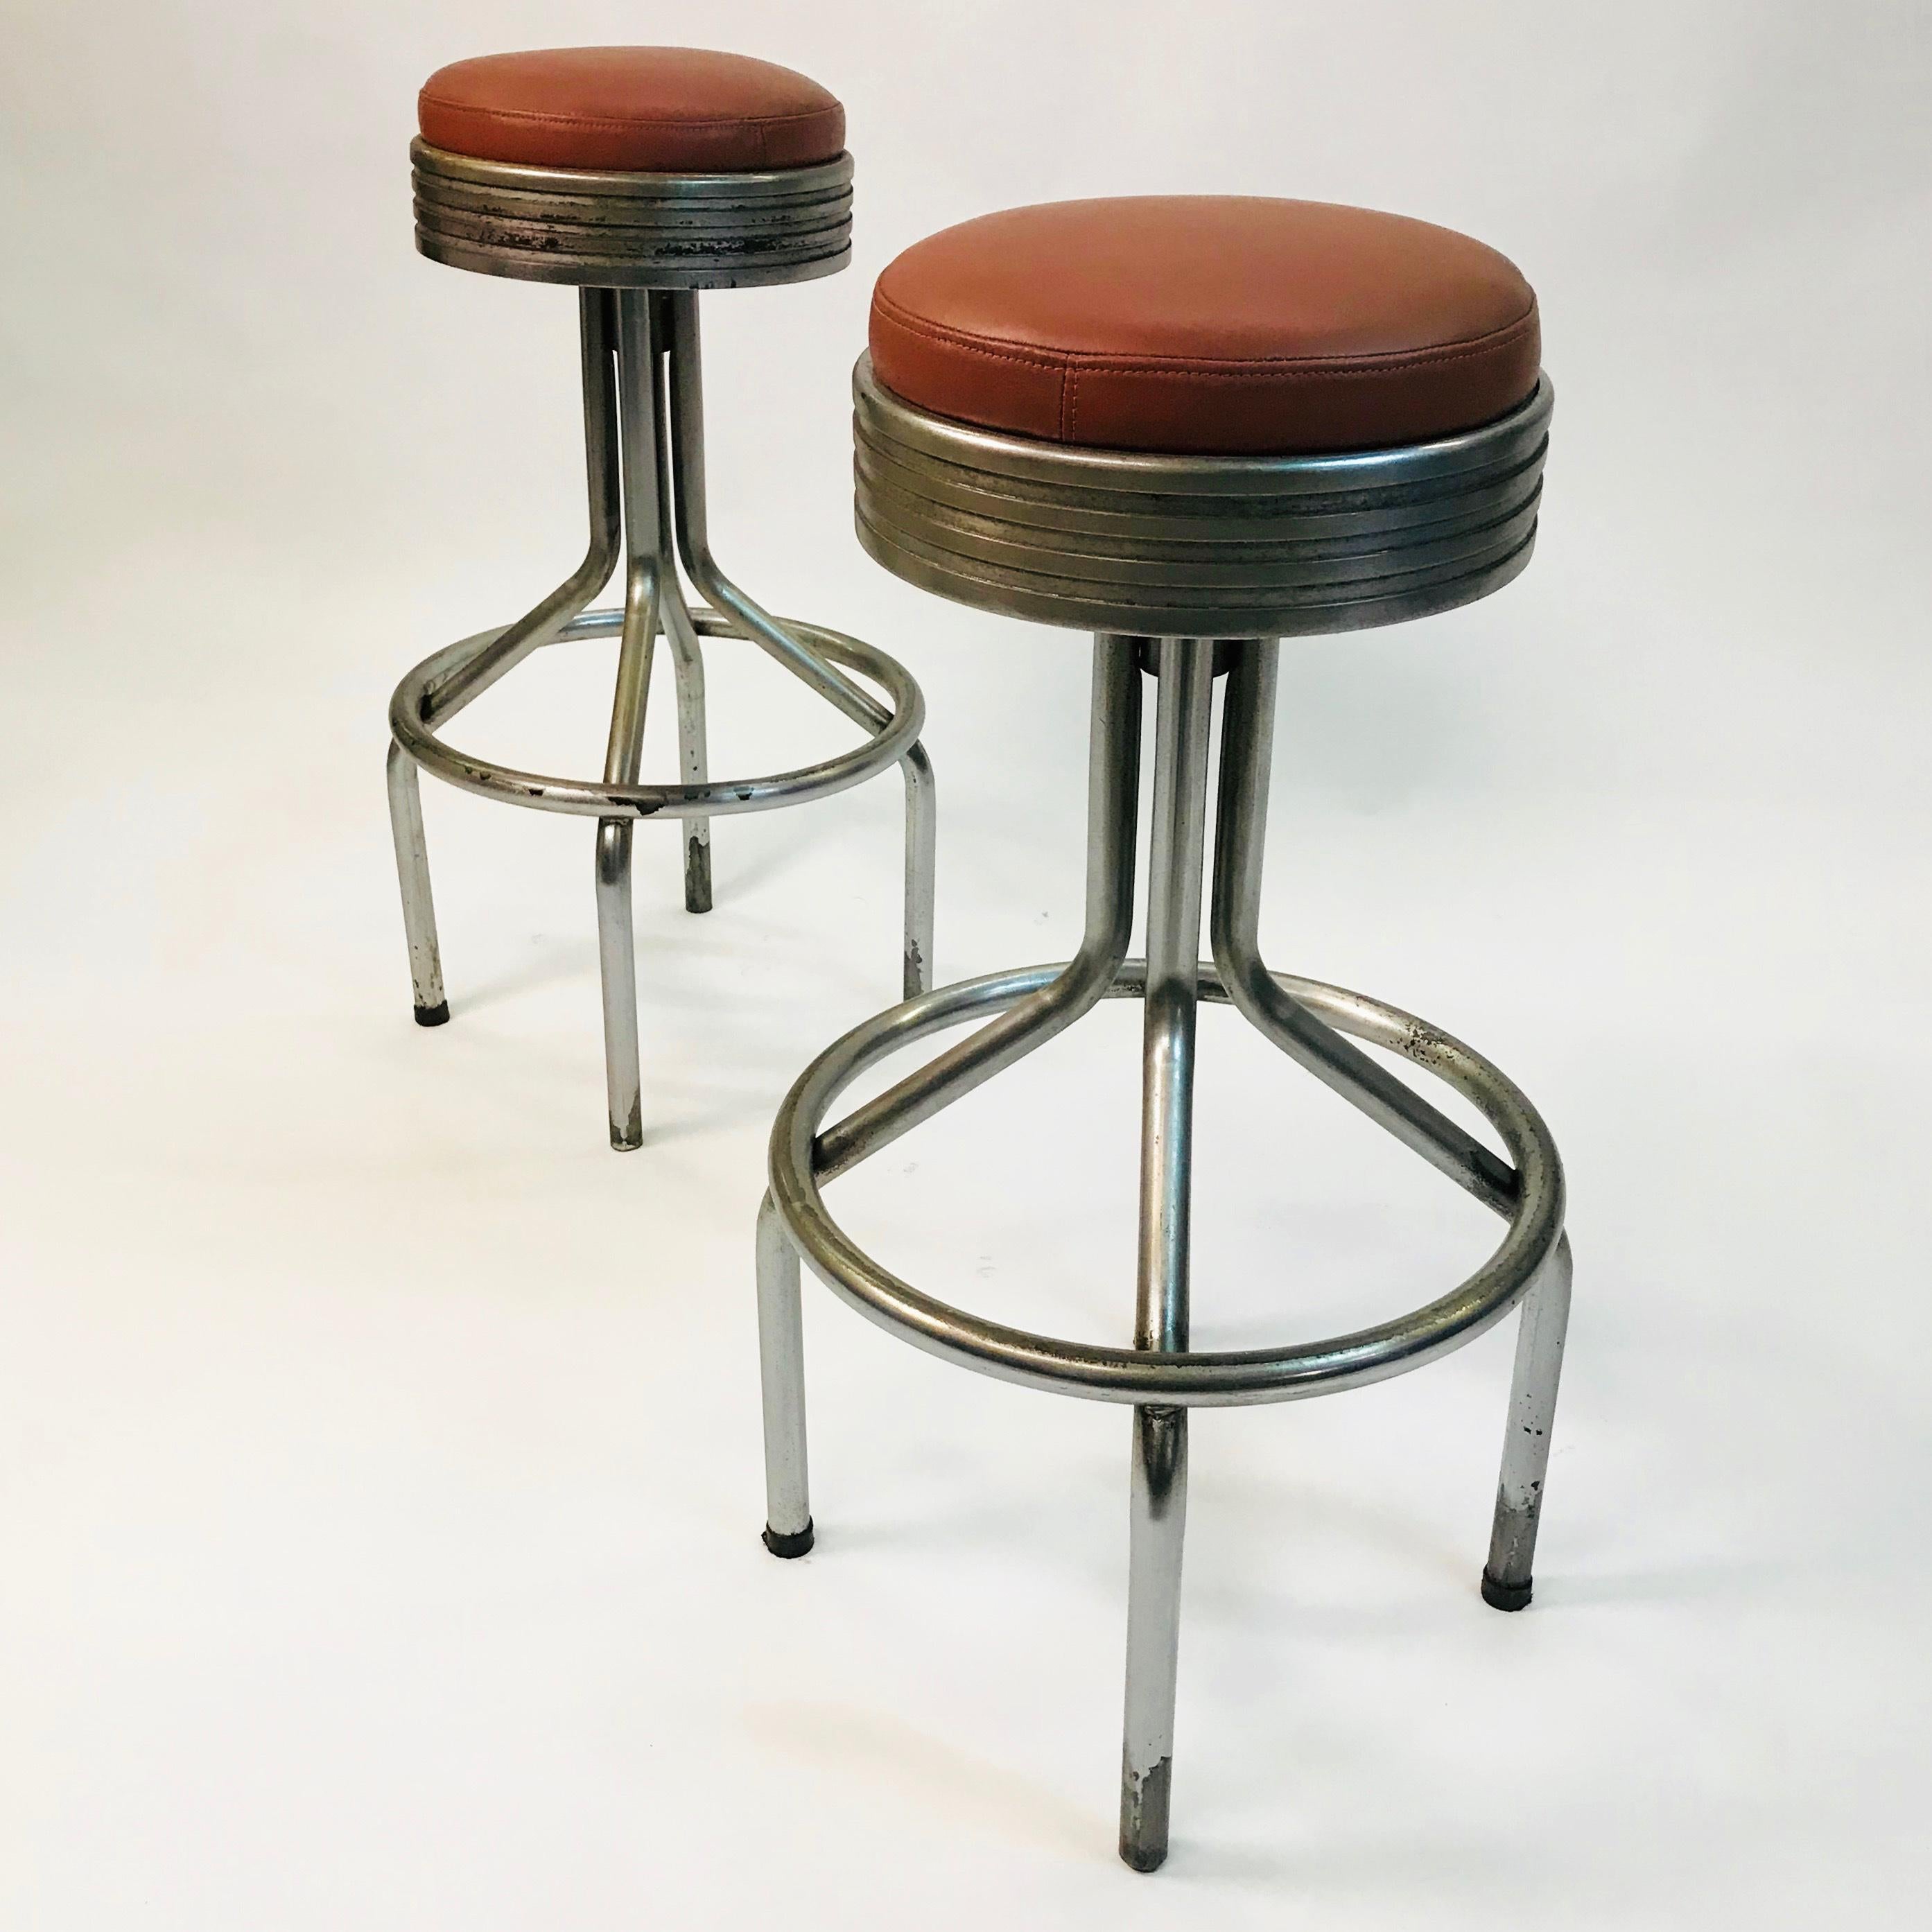 Pair of Machine Age, Art Deco, bar stools by KEM Weber feature tubular chrome bases with 17.5 inch diameter foot rests and newly upholstered, chrome-plated cast iron, swivel, leather seats that are 13.5 inch diameter. The footrests are at 12.5